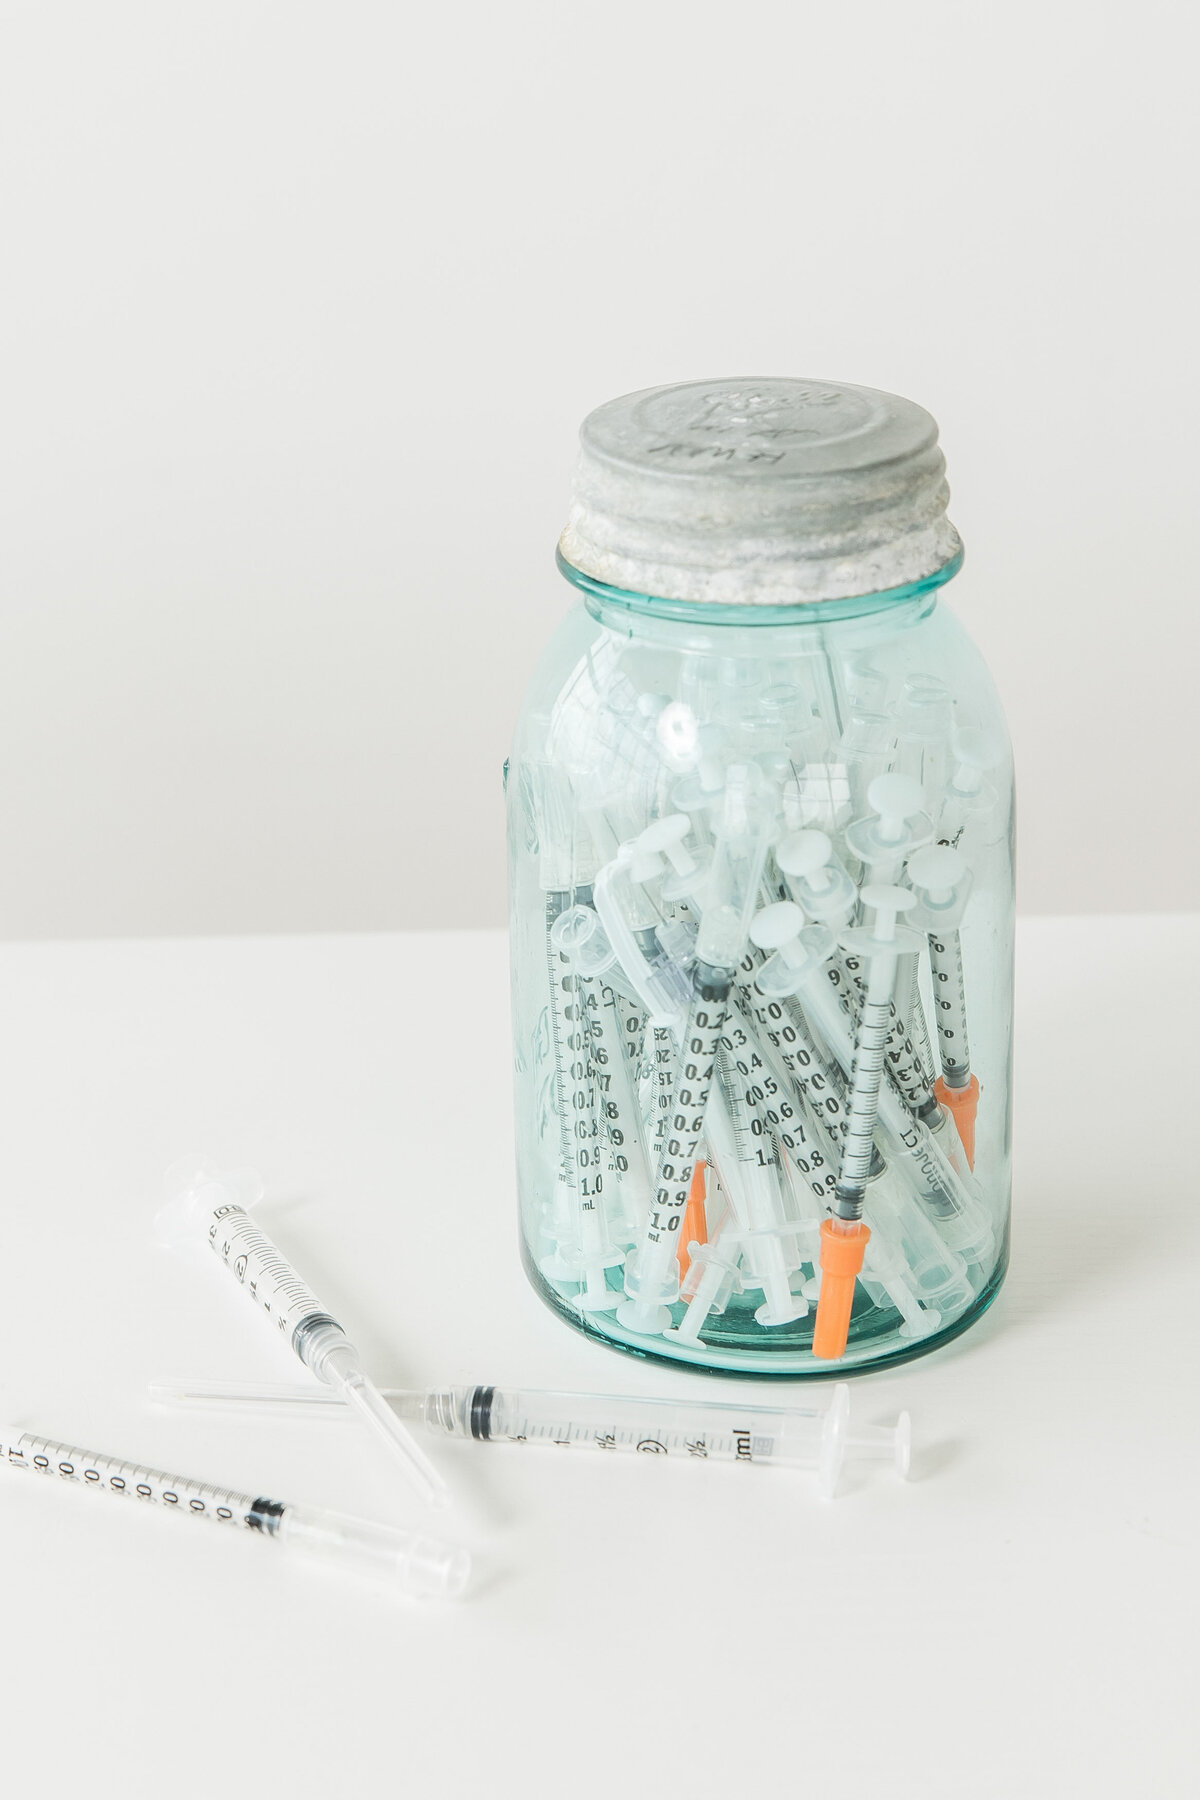 a glass jar with syringes